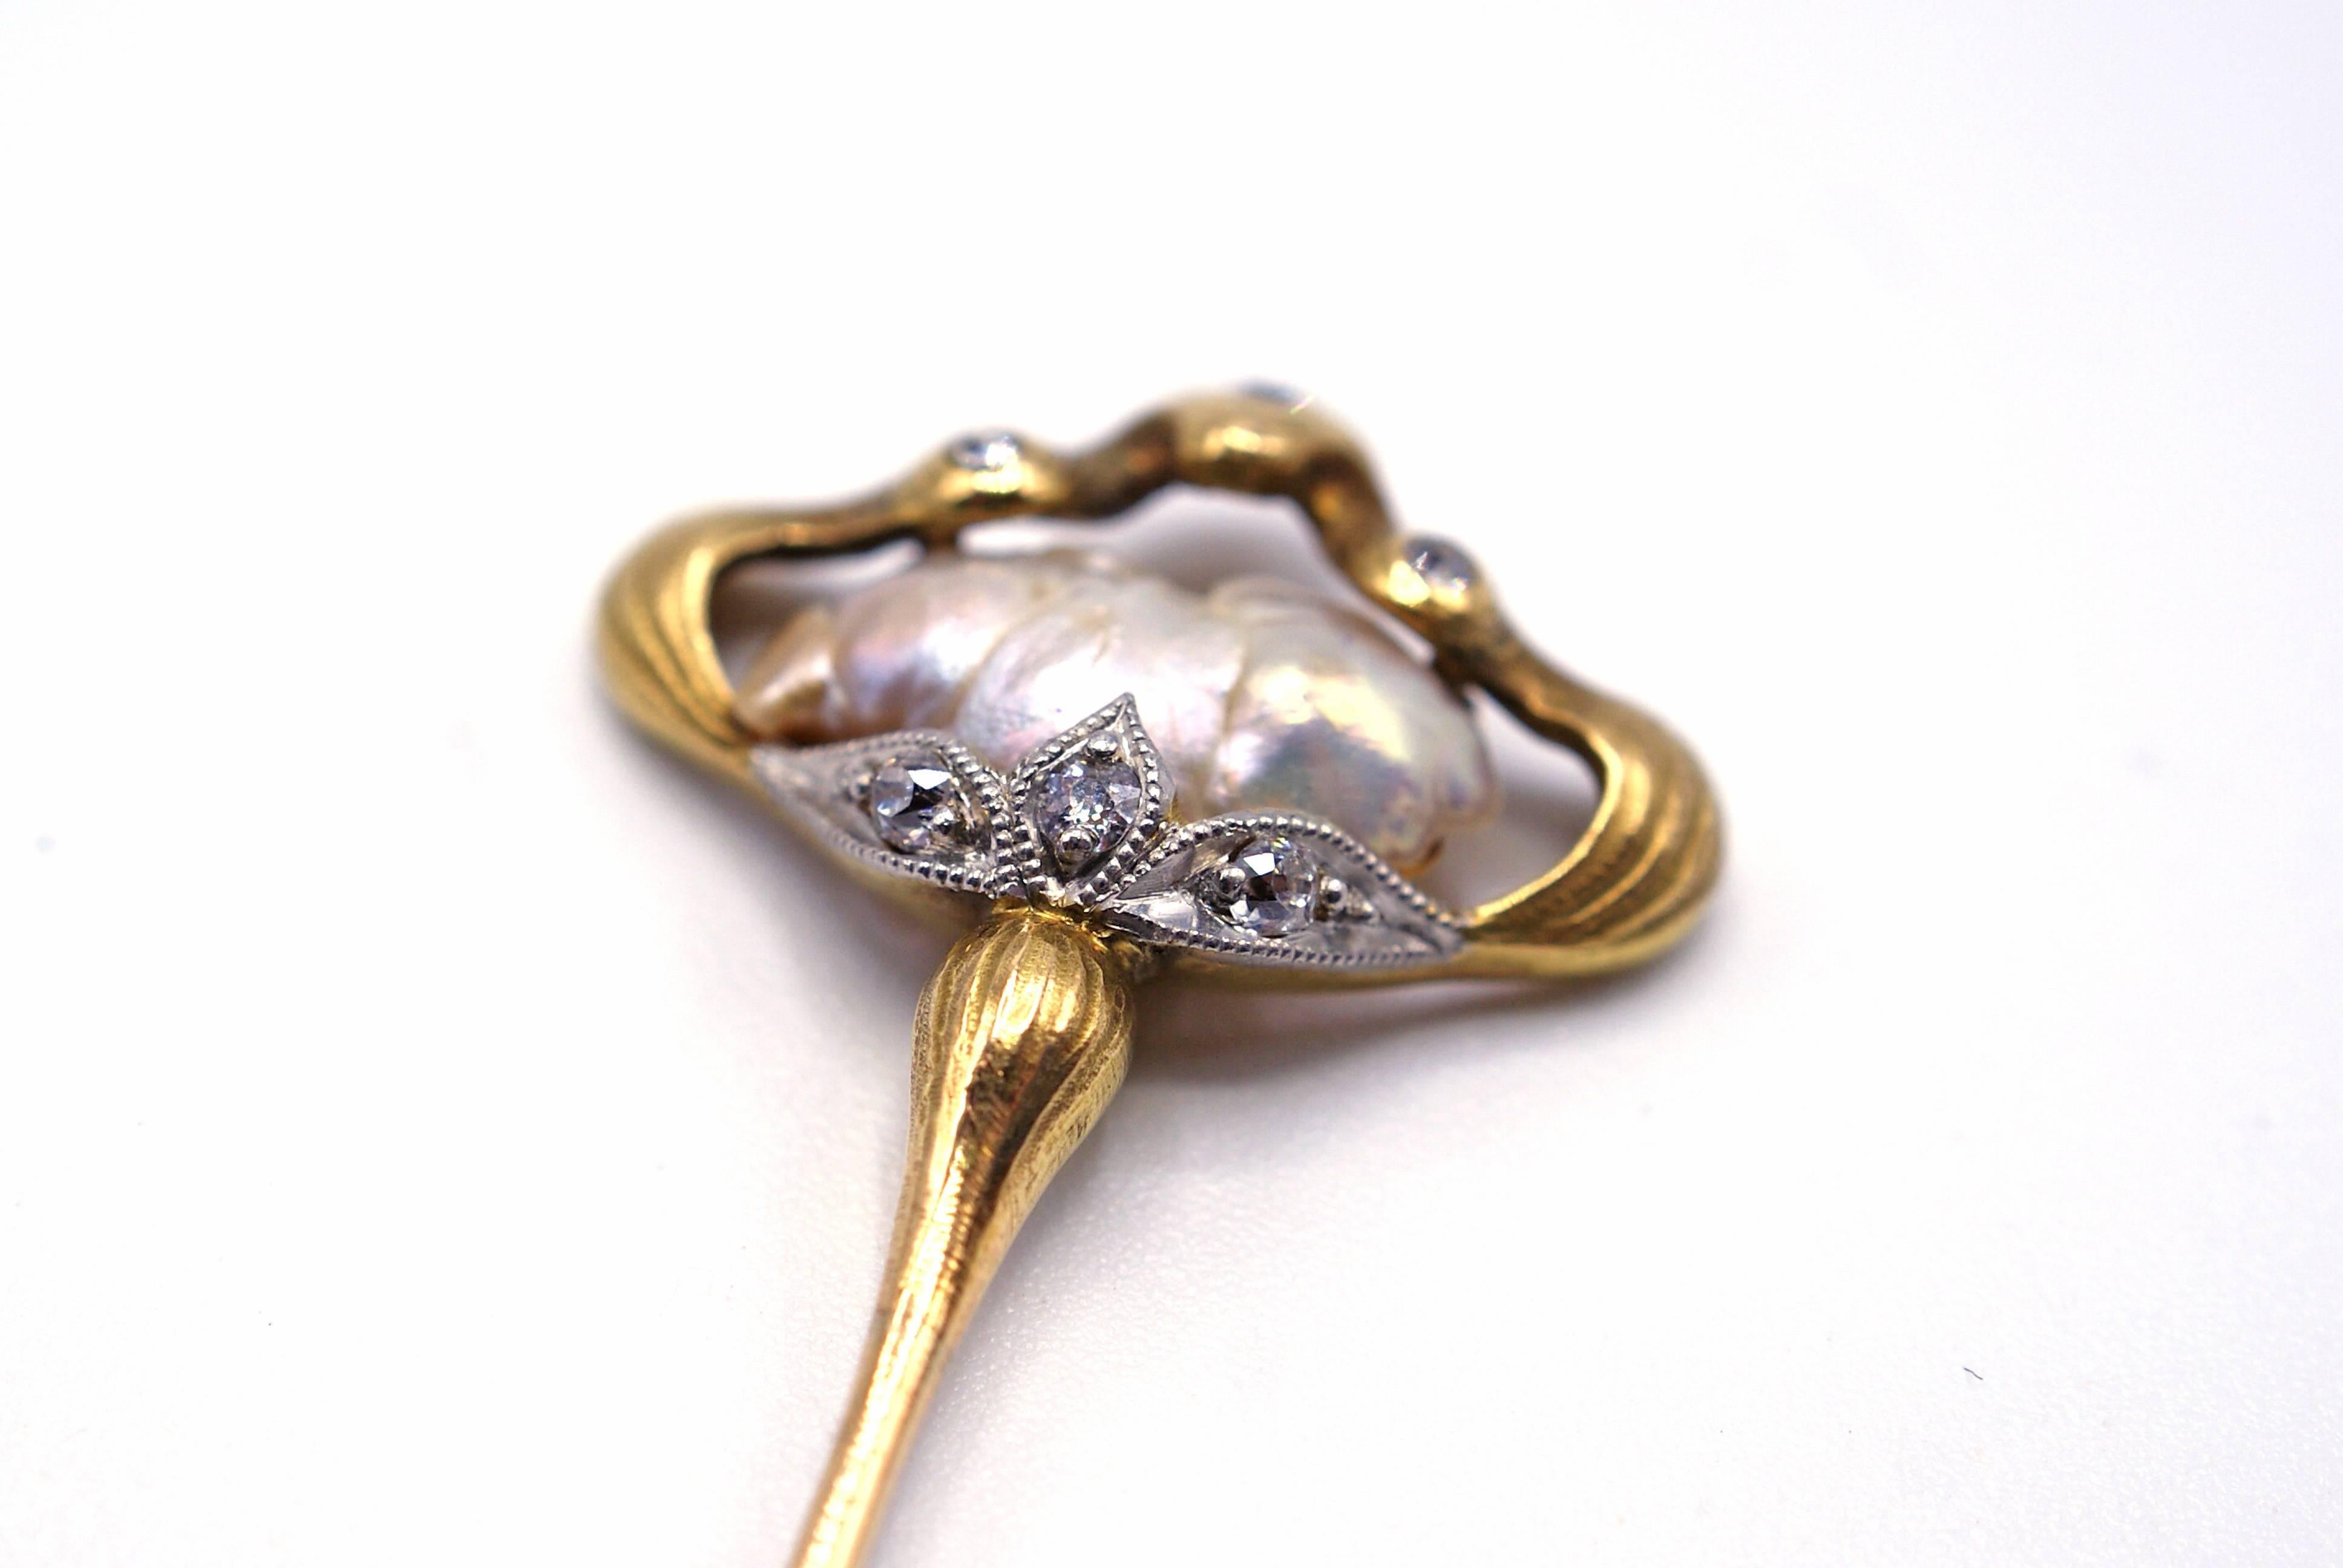 This lovely stick pin is finely handcrafted with a curved detailed gold frame surrounding a lustrous baroque pear. The frame is set with 3 small Old European Cut diamonds on the top and 3 more round diamonds at the bottom meeting the pin-stem. A